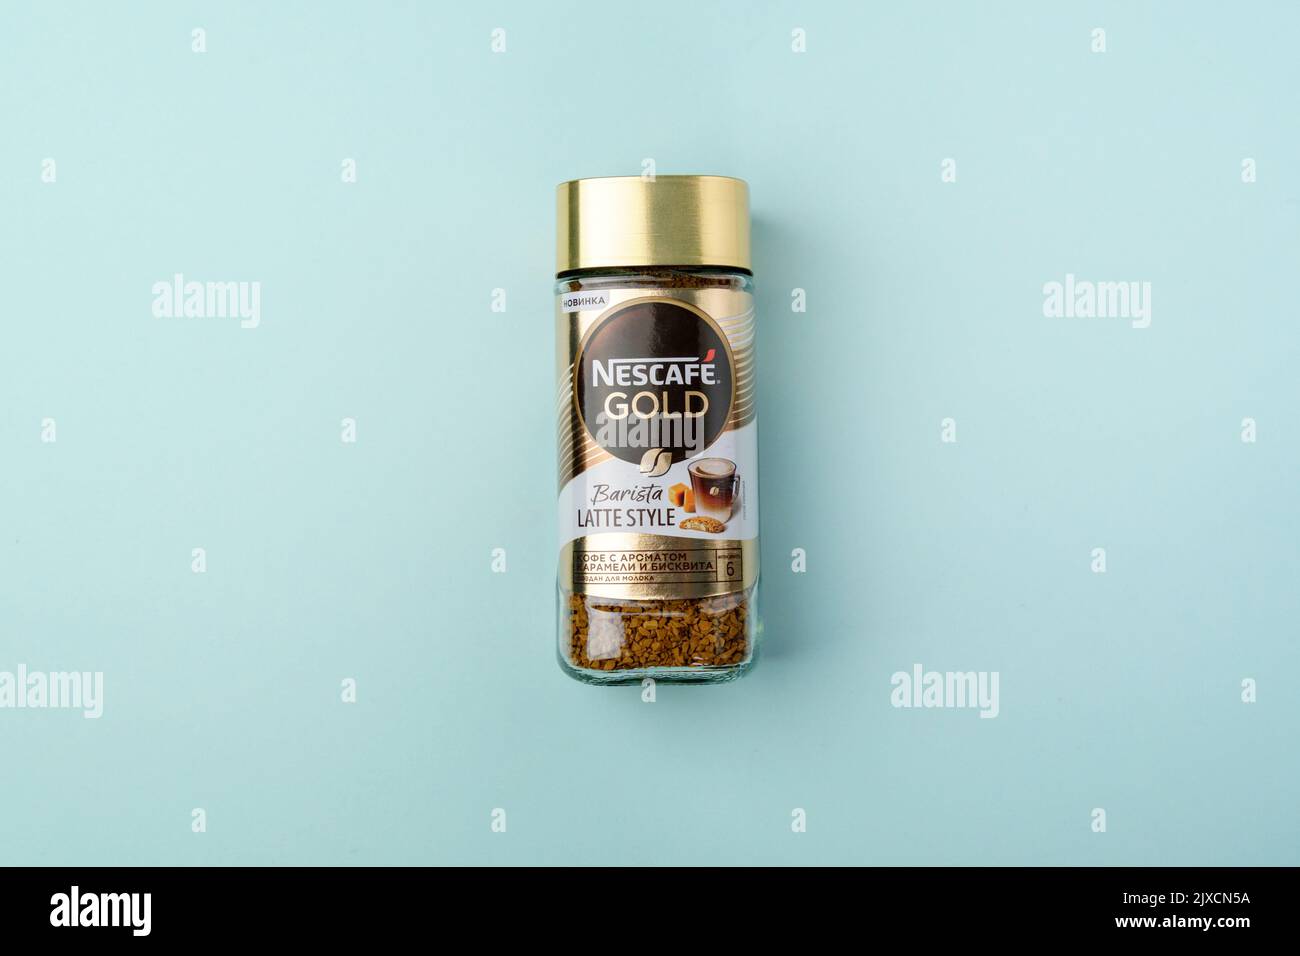 https://c8.alamy.com/comp/2JXCN5A/tyumen-russia-june-30-2022-nescafe-gold-barista-latte-style-is-a-brand-of-instant-coffee-made-by-nestle-2JXCN5A.jpg